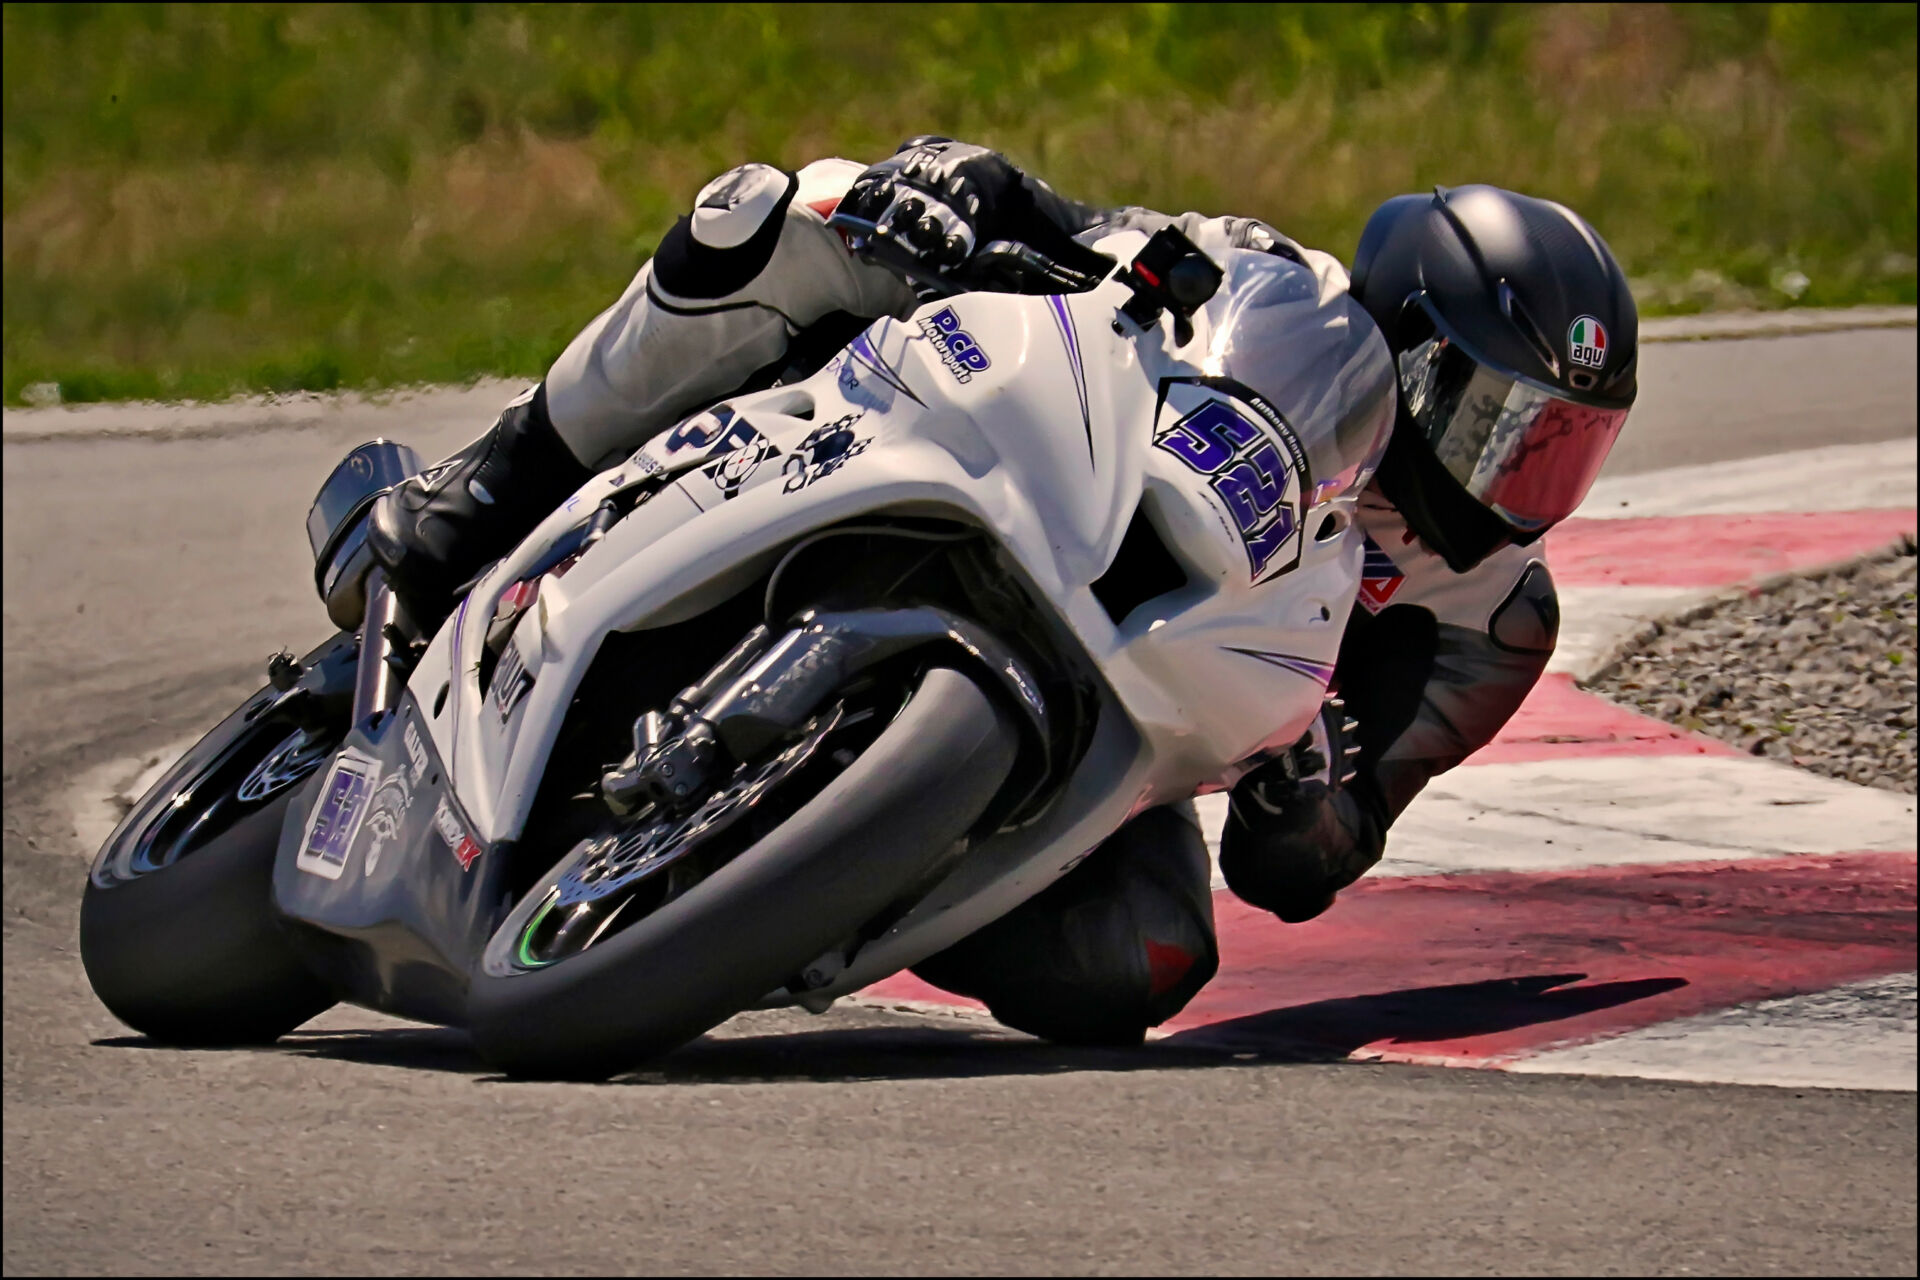 Anthony Norton (521) was the class of the field in the King of the Mountain race during Round One of the UtahSBA Utah Motorcycle Law Masters of the Mountain race series at Utah Motorsports Campus' West Track. Photo by Steve Midgley, courtesy UtahSBA.